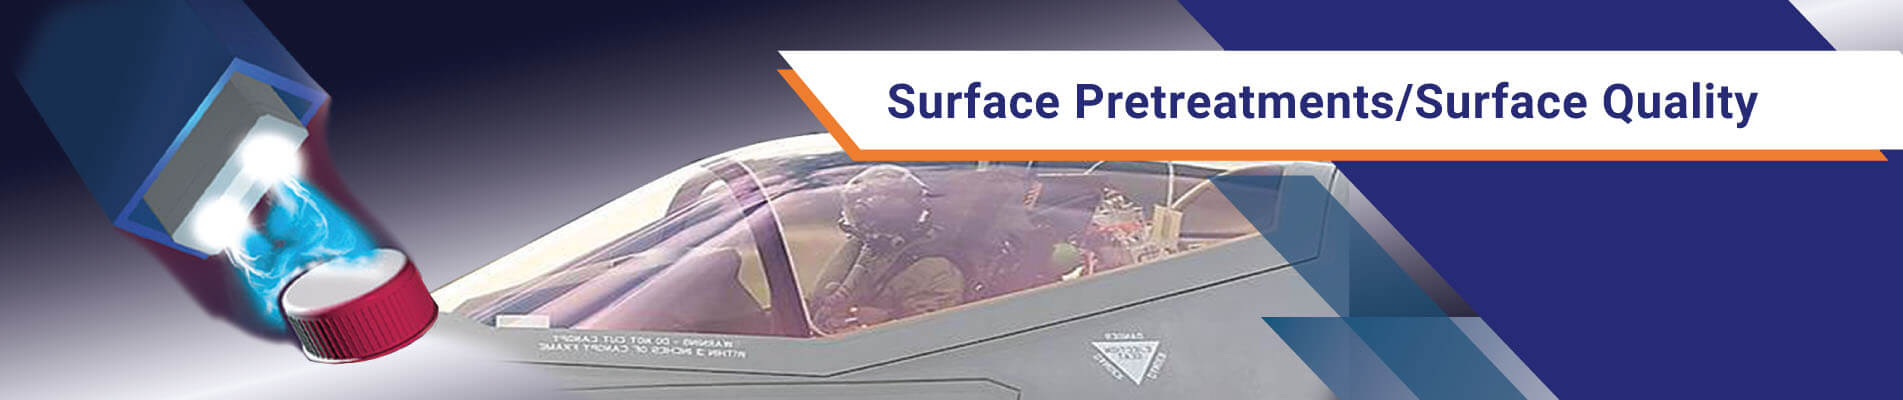 Surface Pretreatments / Surface Quality - The Sabreen Group, Inc.